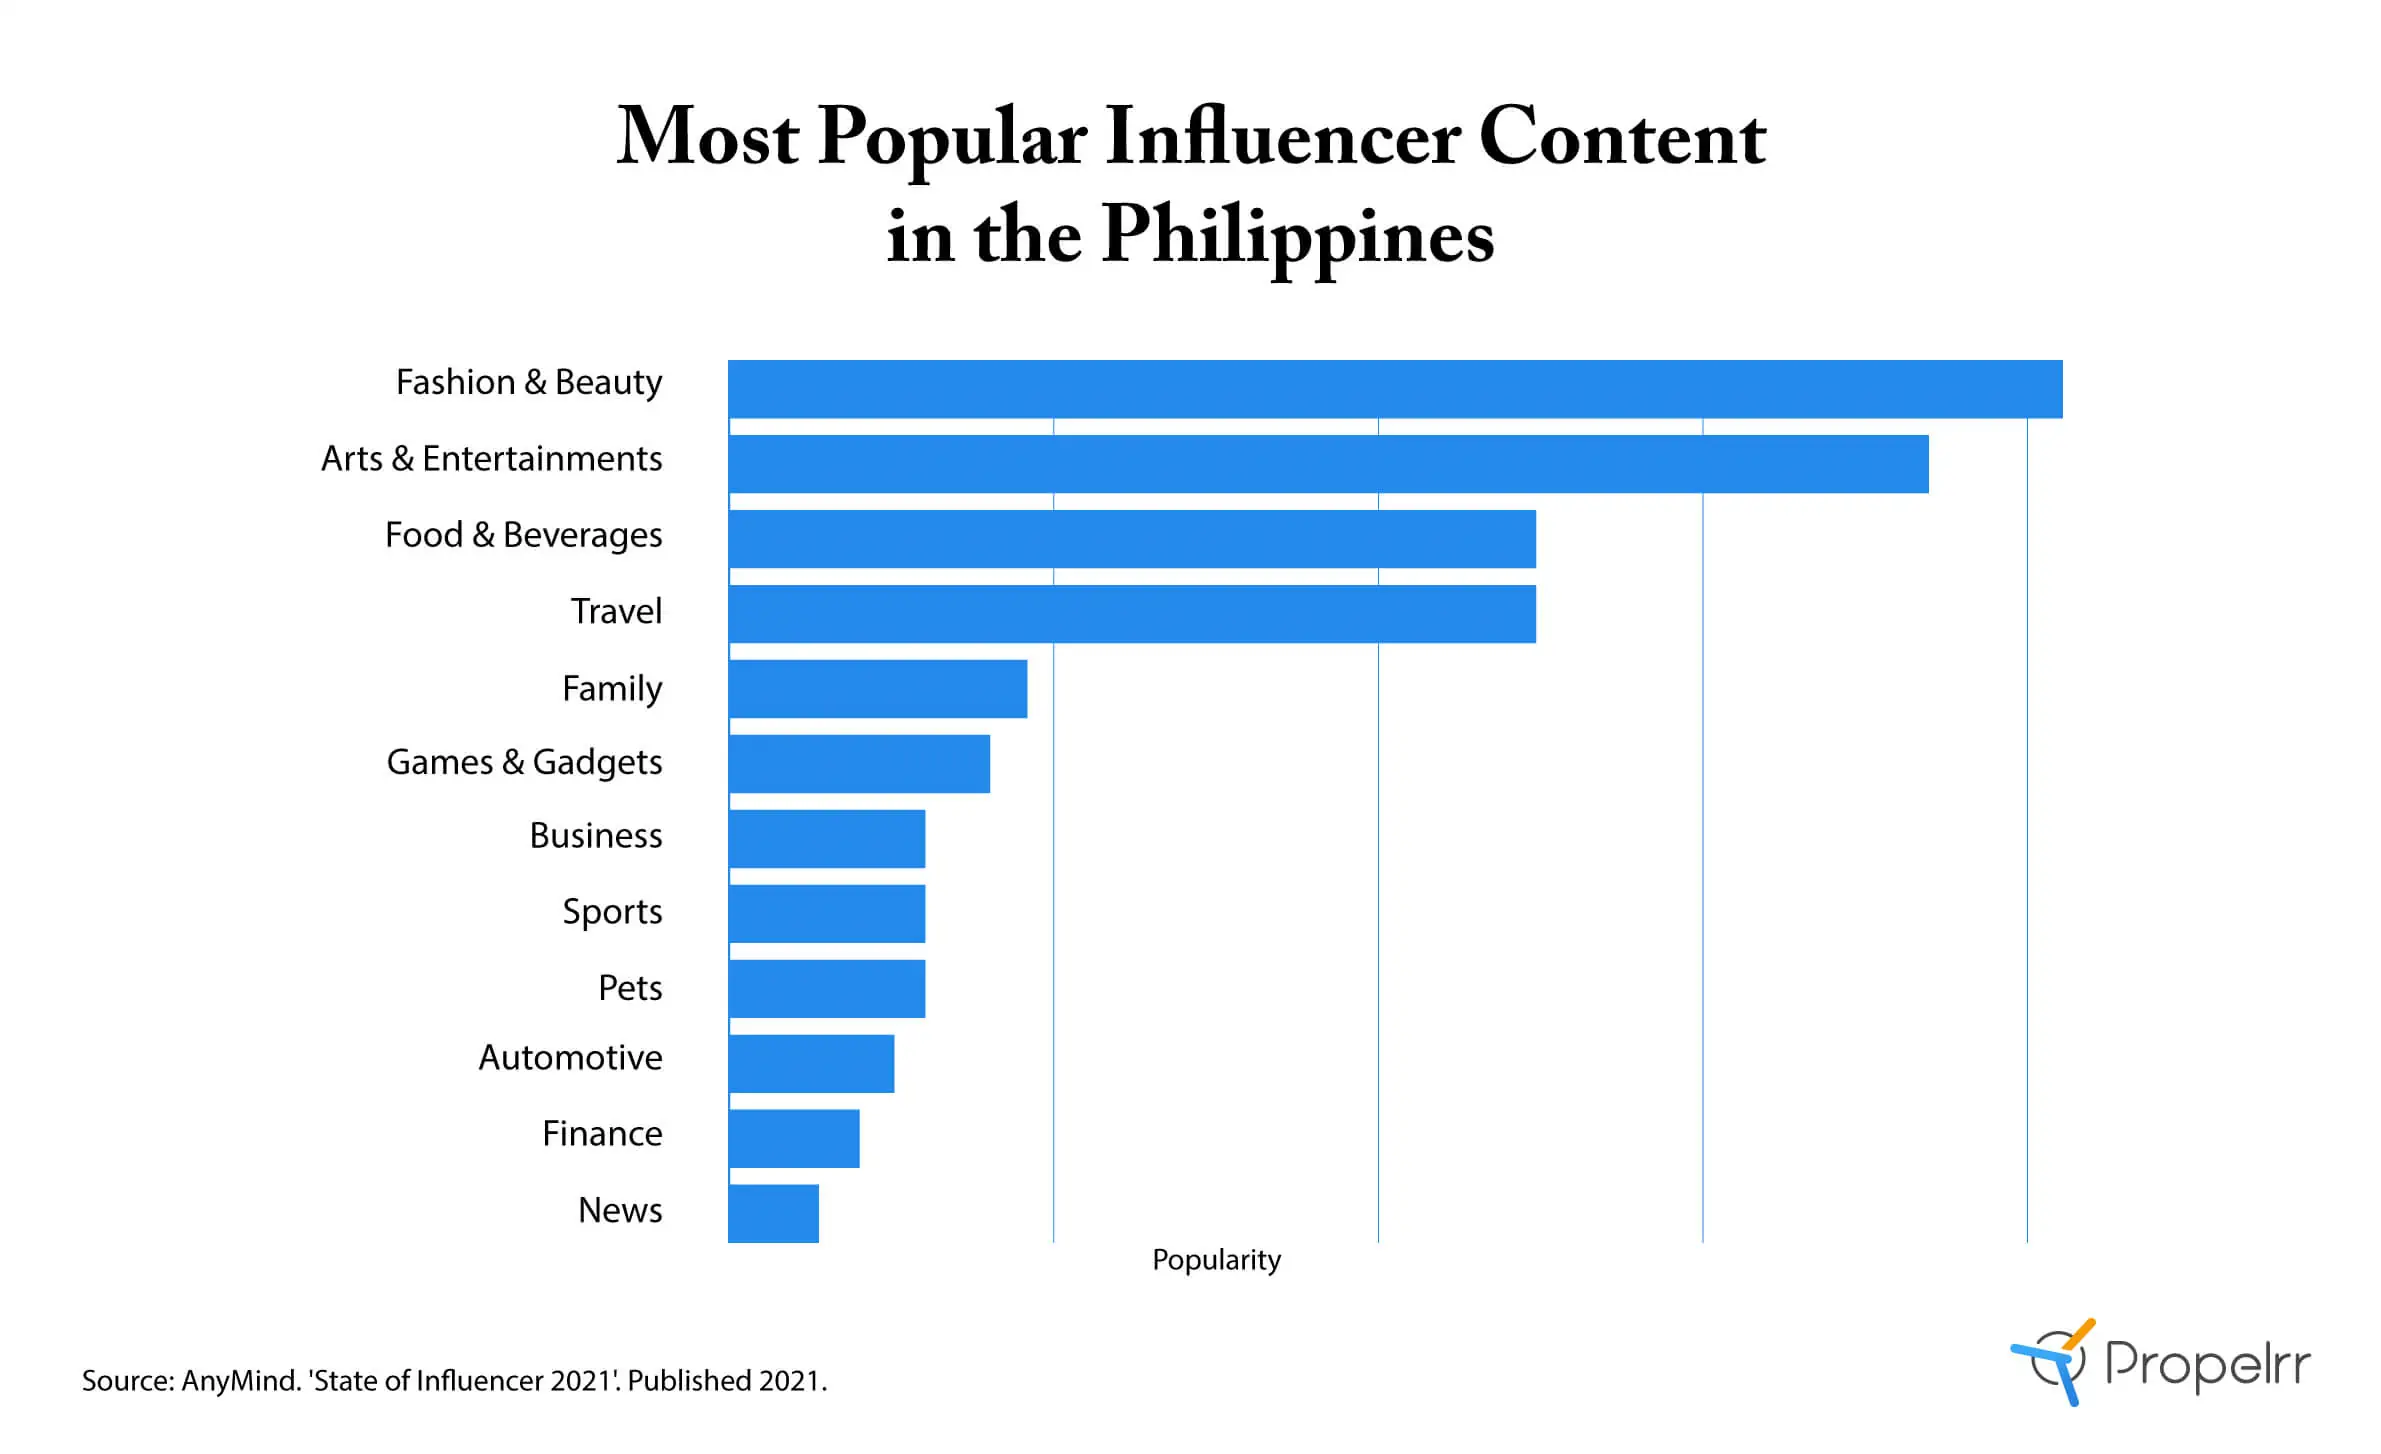 most popular influencer content topics in the Philippines